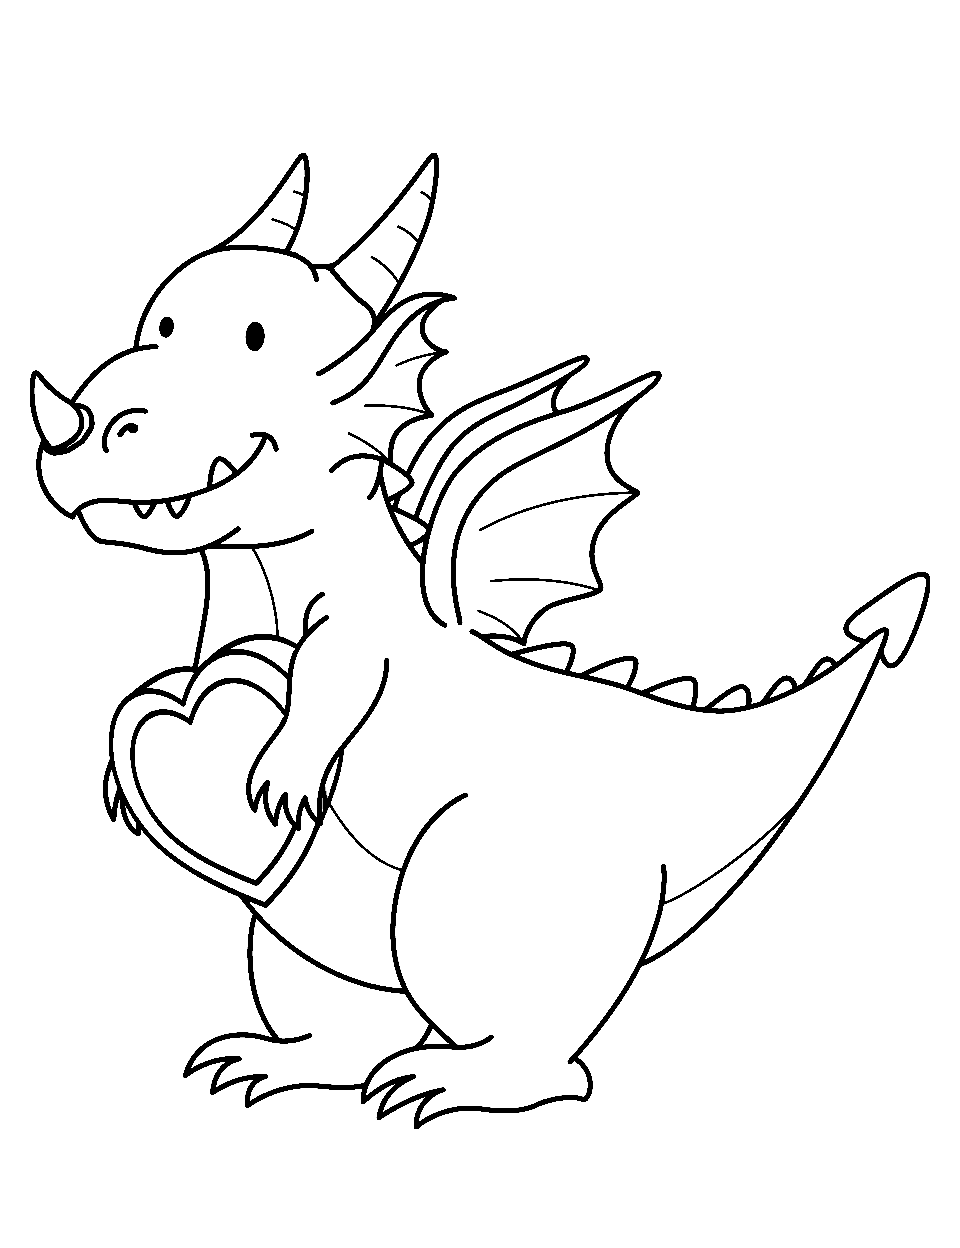 Dragon Holding a Heart Coloring Page - A dragon Holding a giant heart with its claws ready to be presented to its loved one.